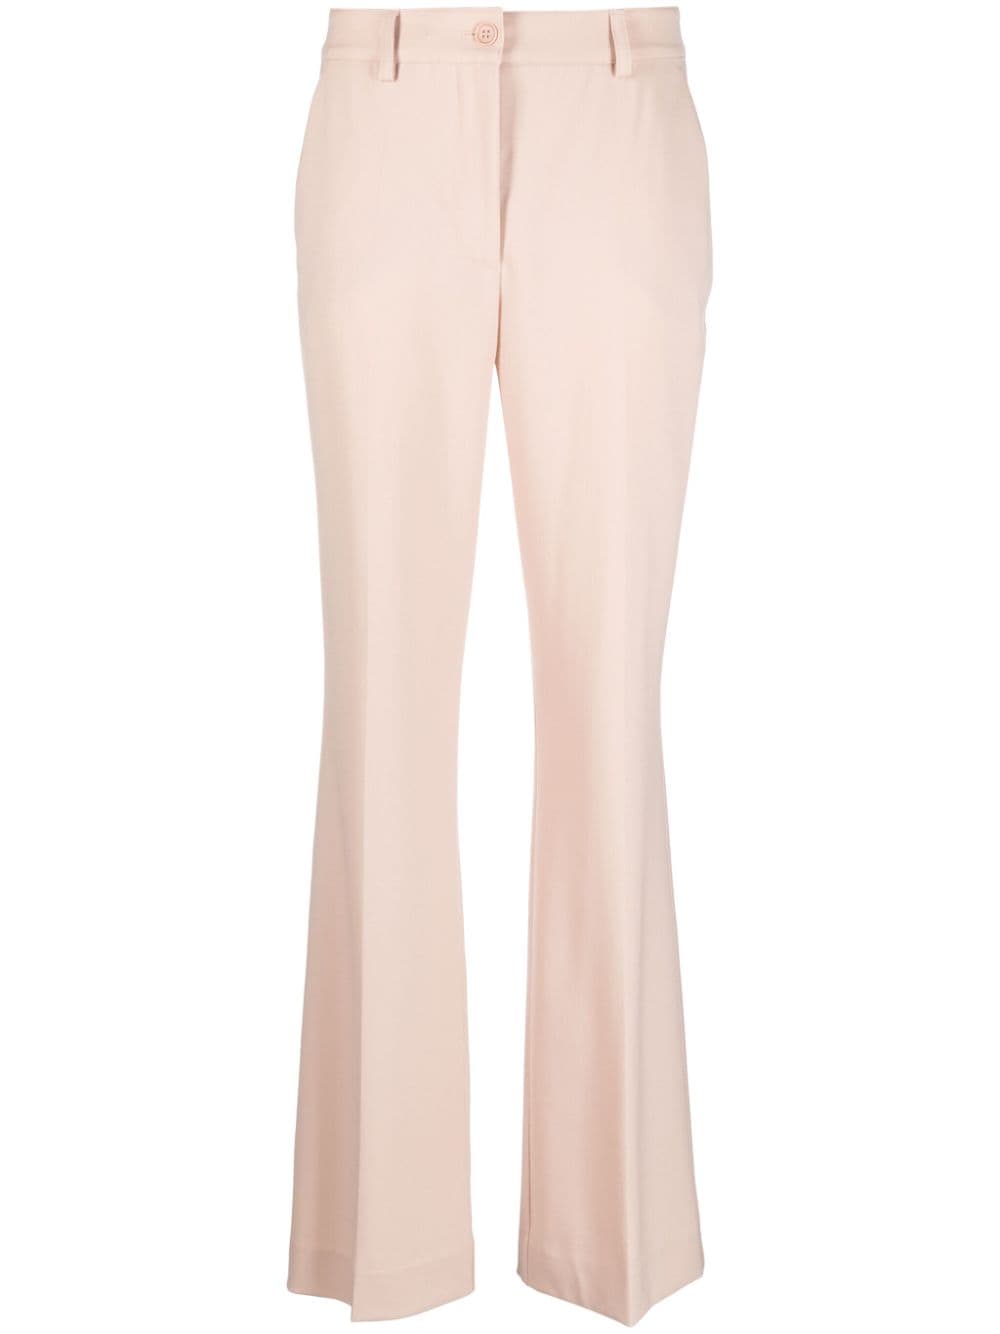 P.A.R.O.S.H. pressed-crease textured flared trousers - Pink von P.A.R.O.S.H.